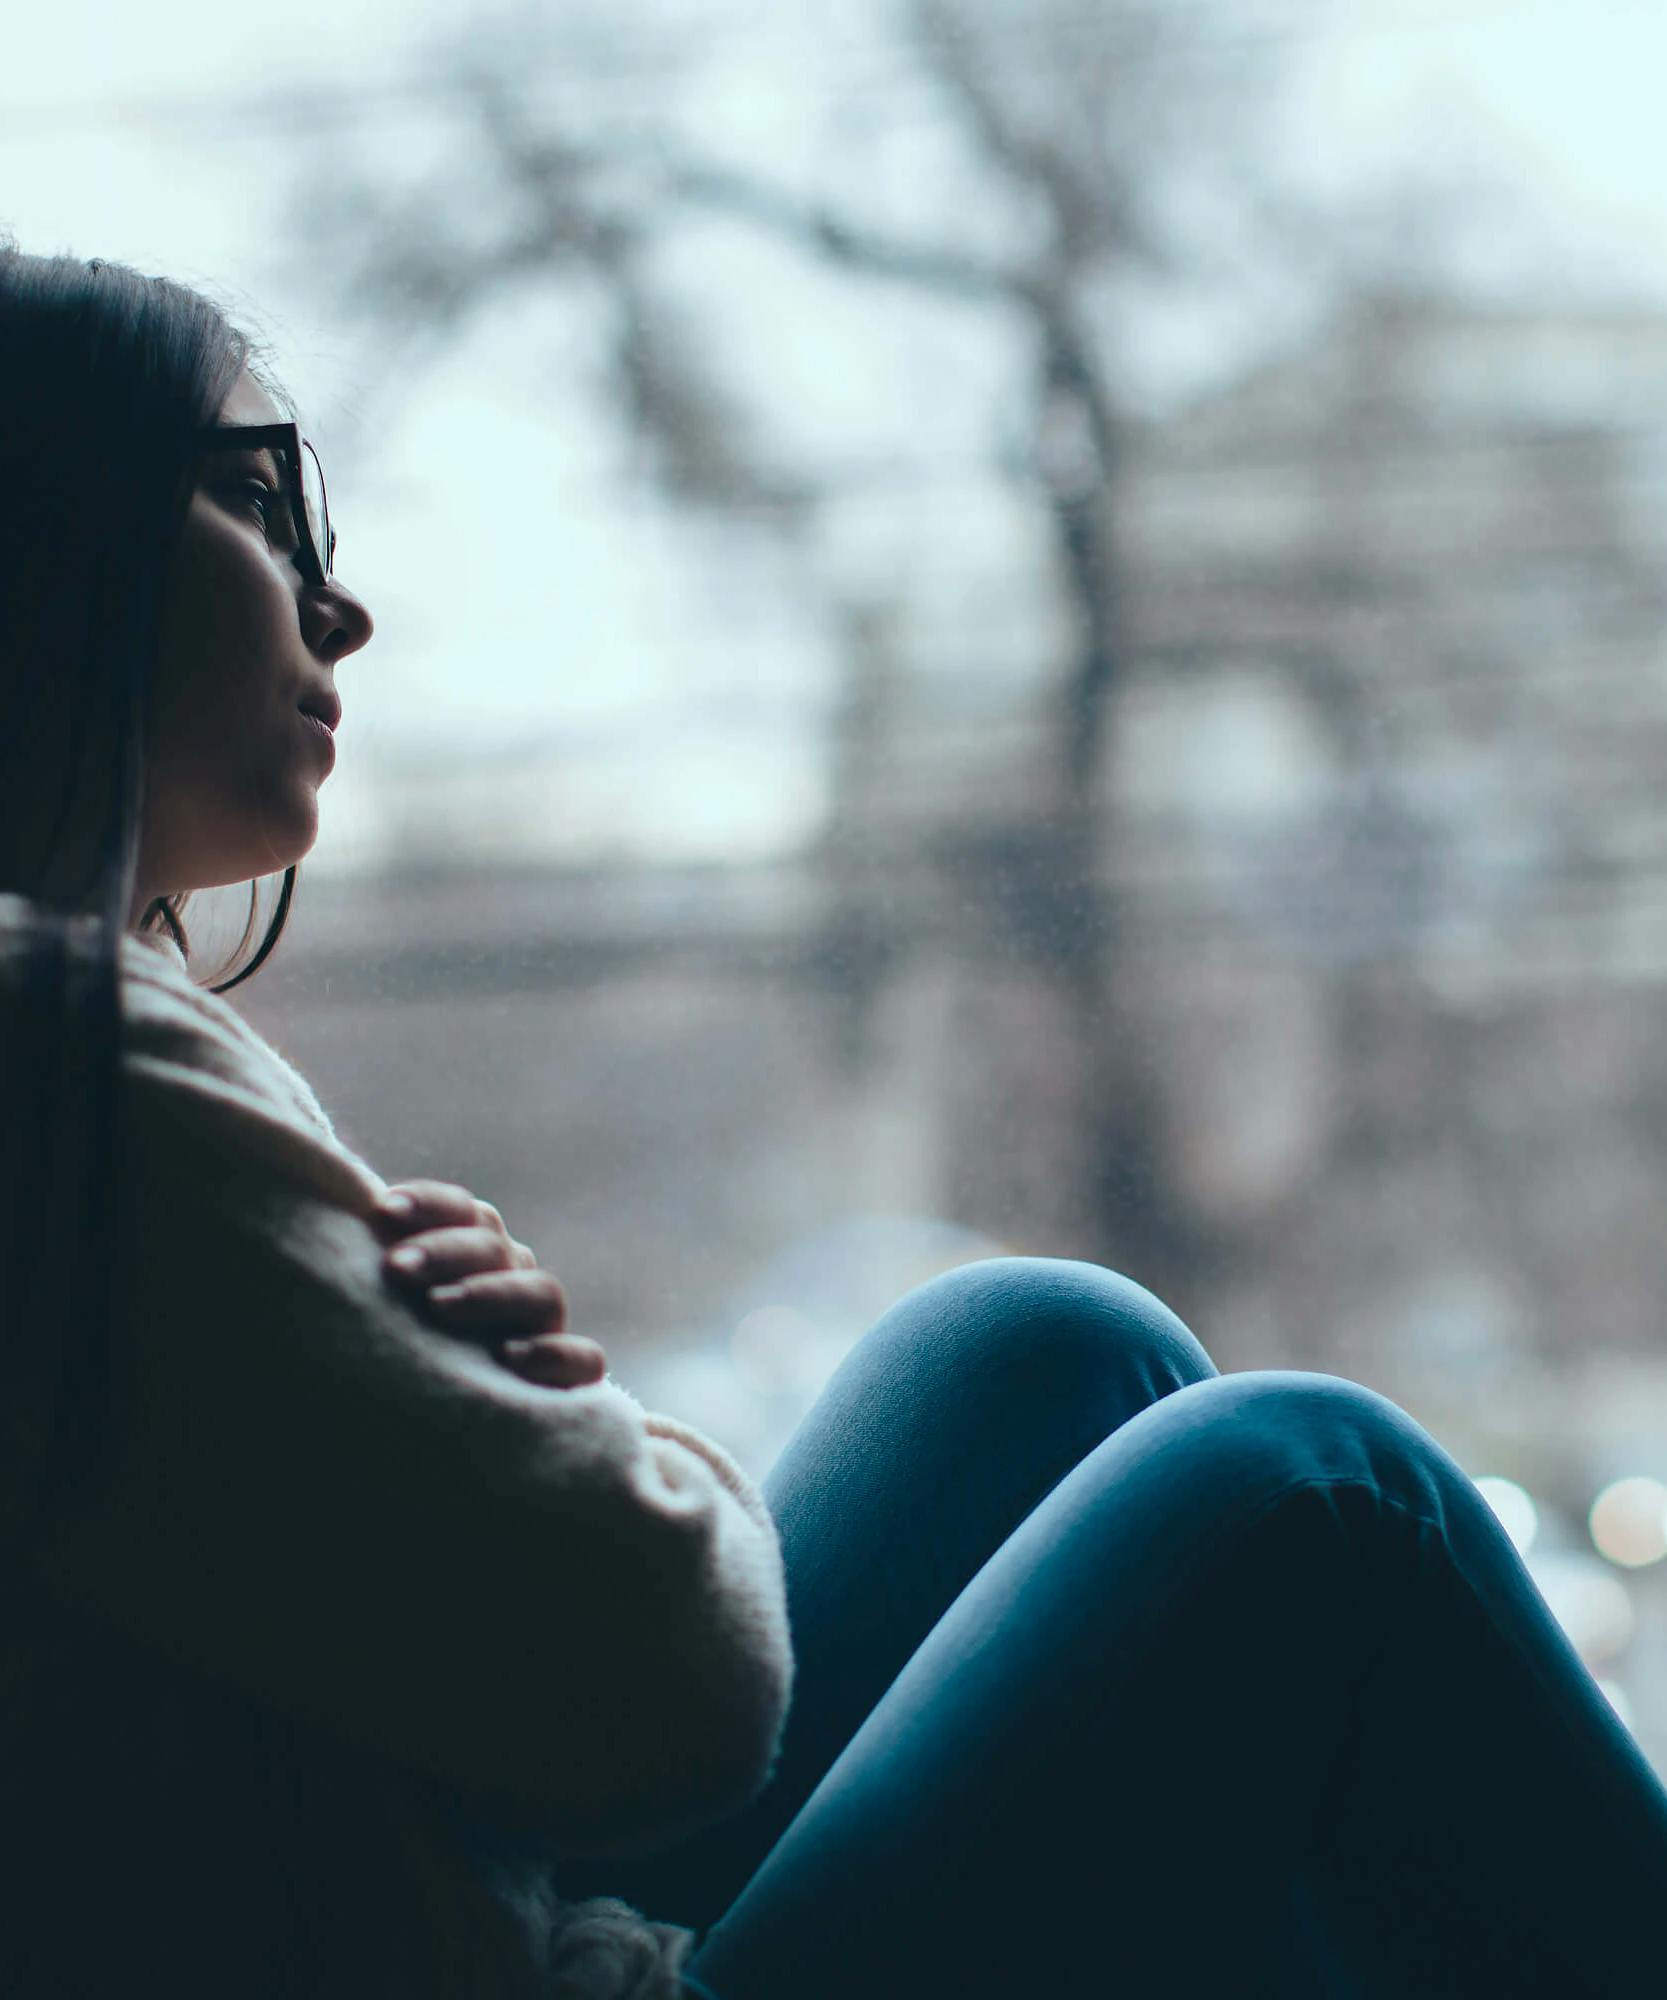 I Got An Abortion At 17. Here's My Story